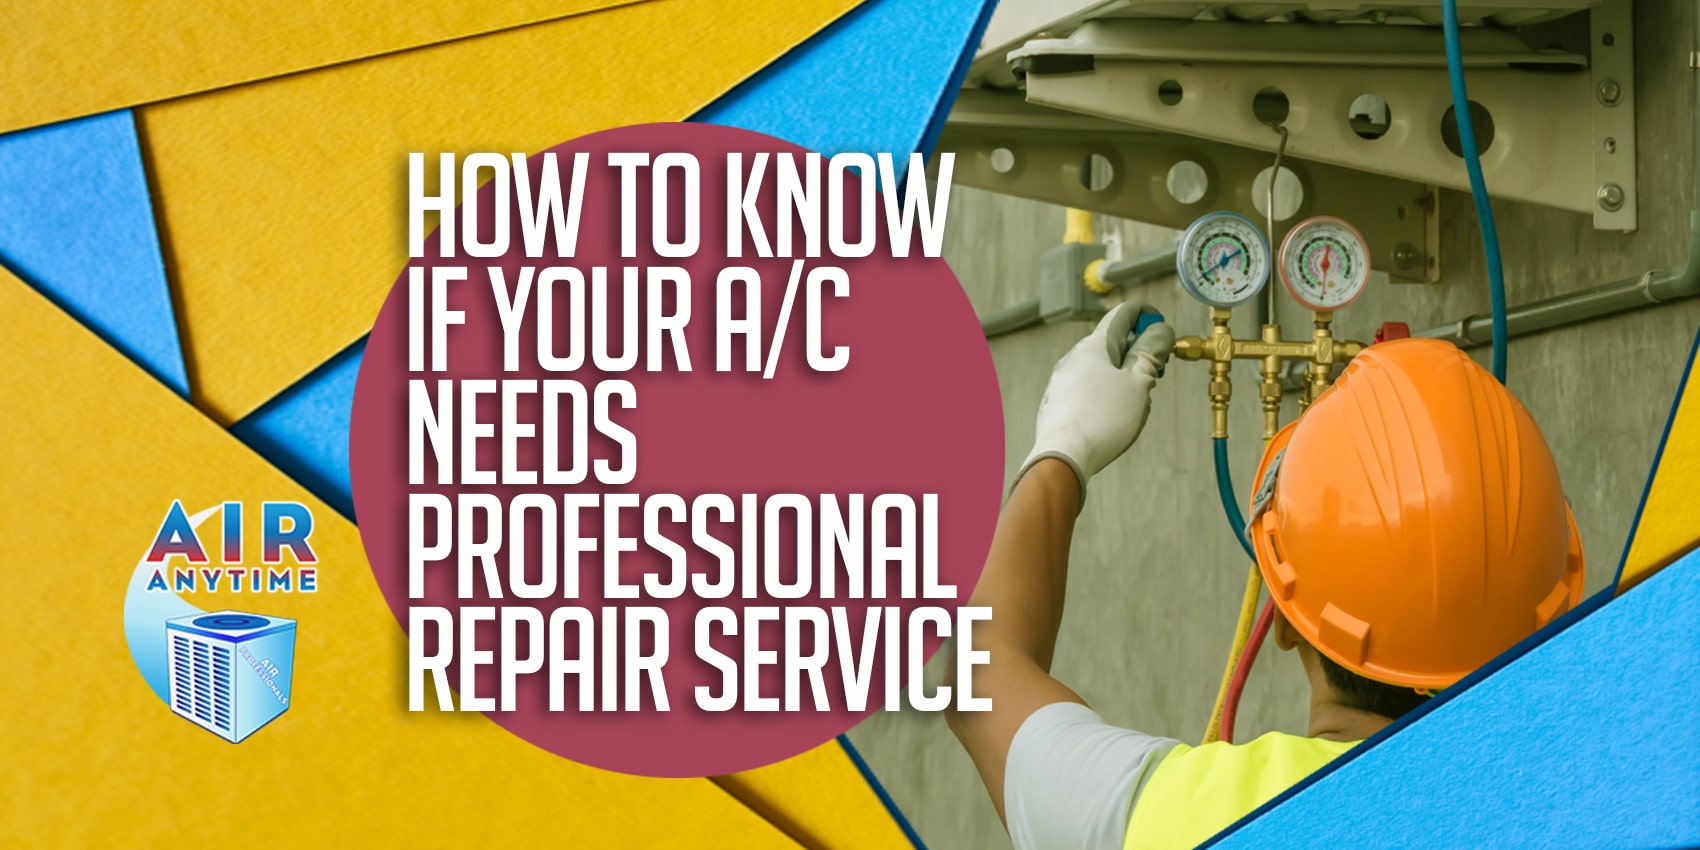 How To Know If Your A/C Needs Professional Repair Service